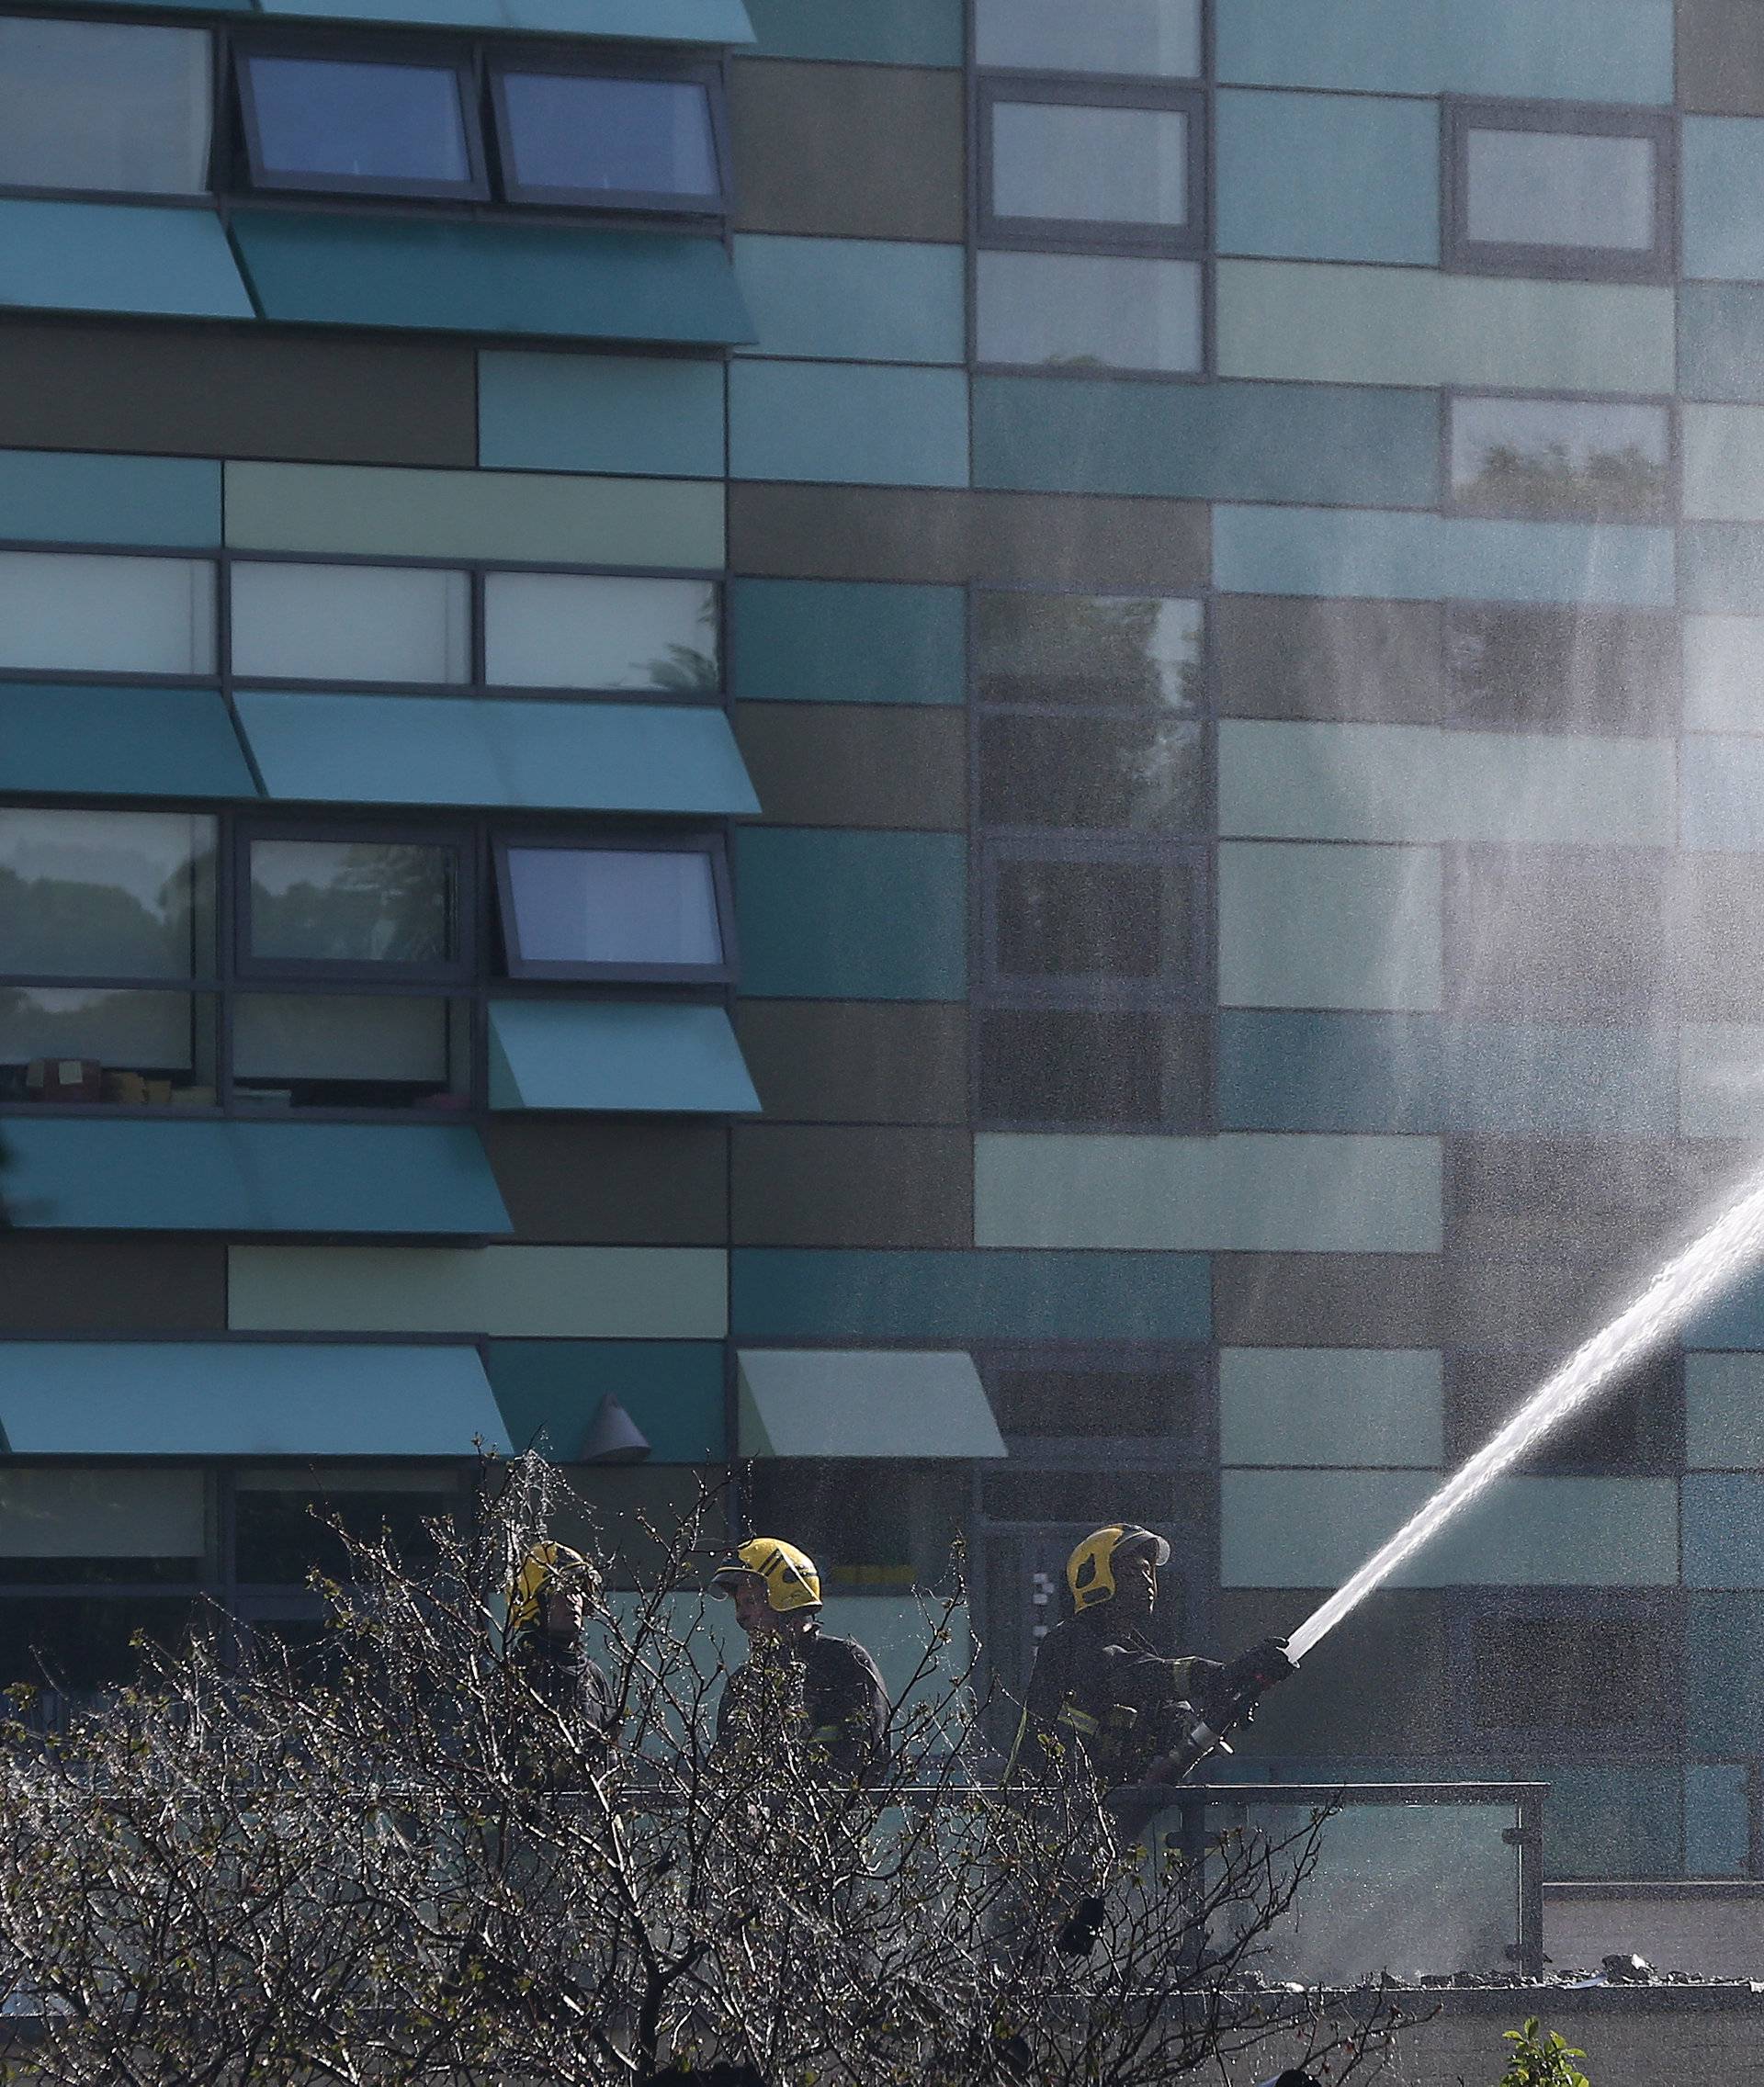 Firefighters direct jets of water towards a tower block severly damaged by a serious fire, in north Kensington, West London